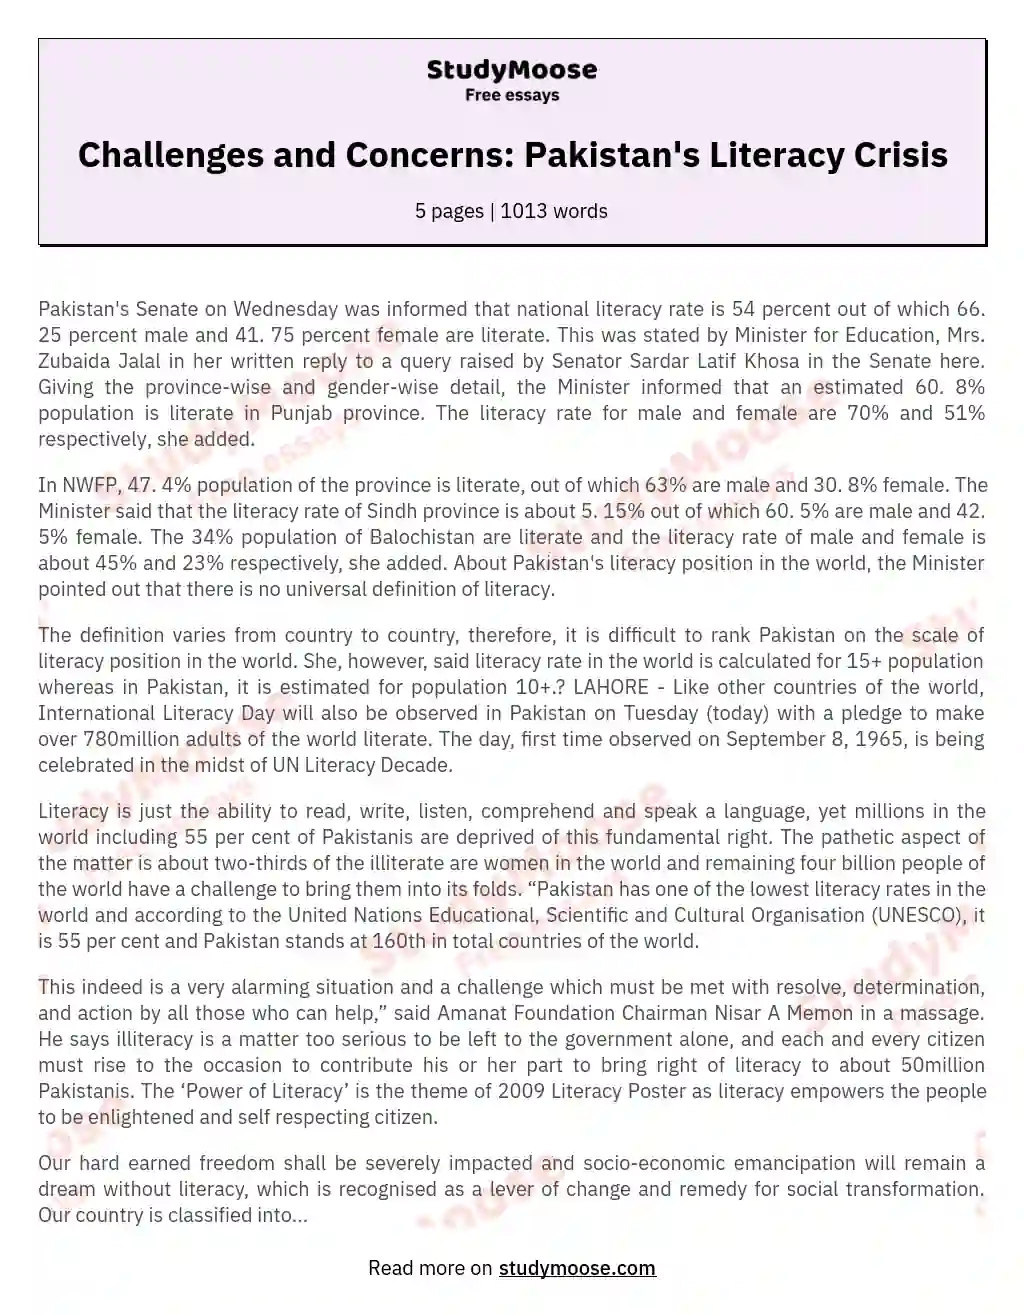 Challenges and Concerns: Pakistan's Literacy Crisis essay